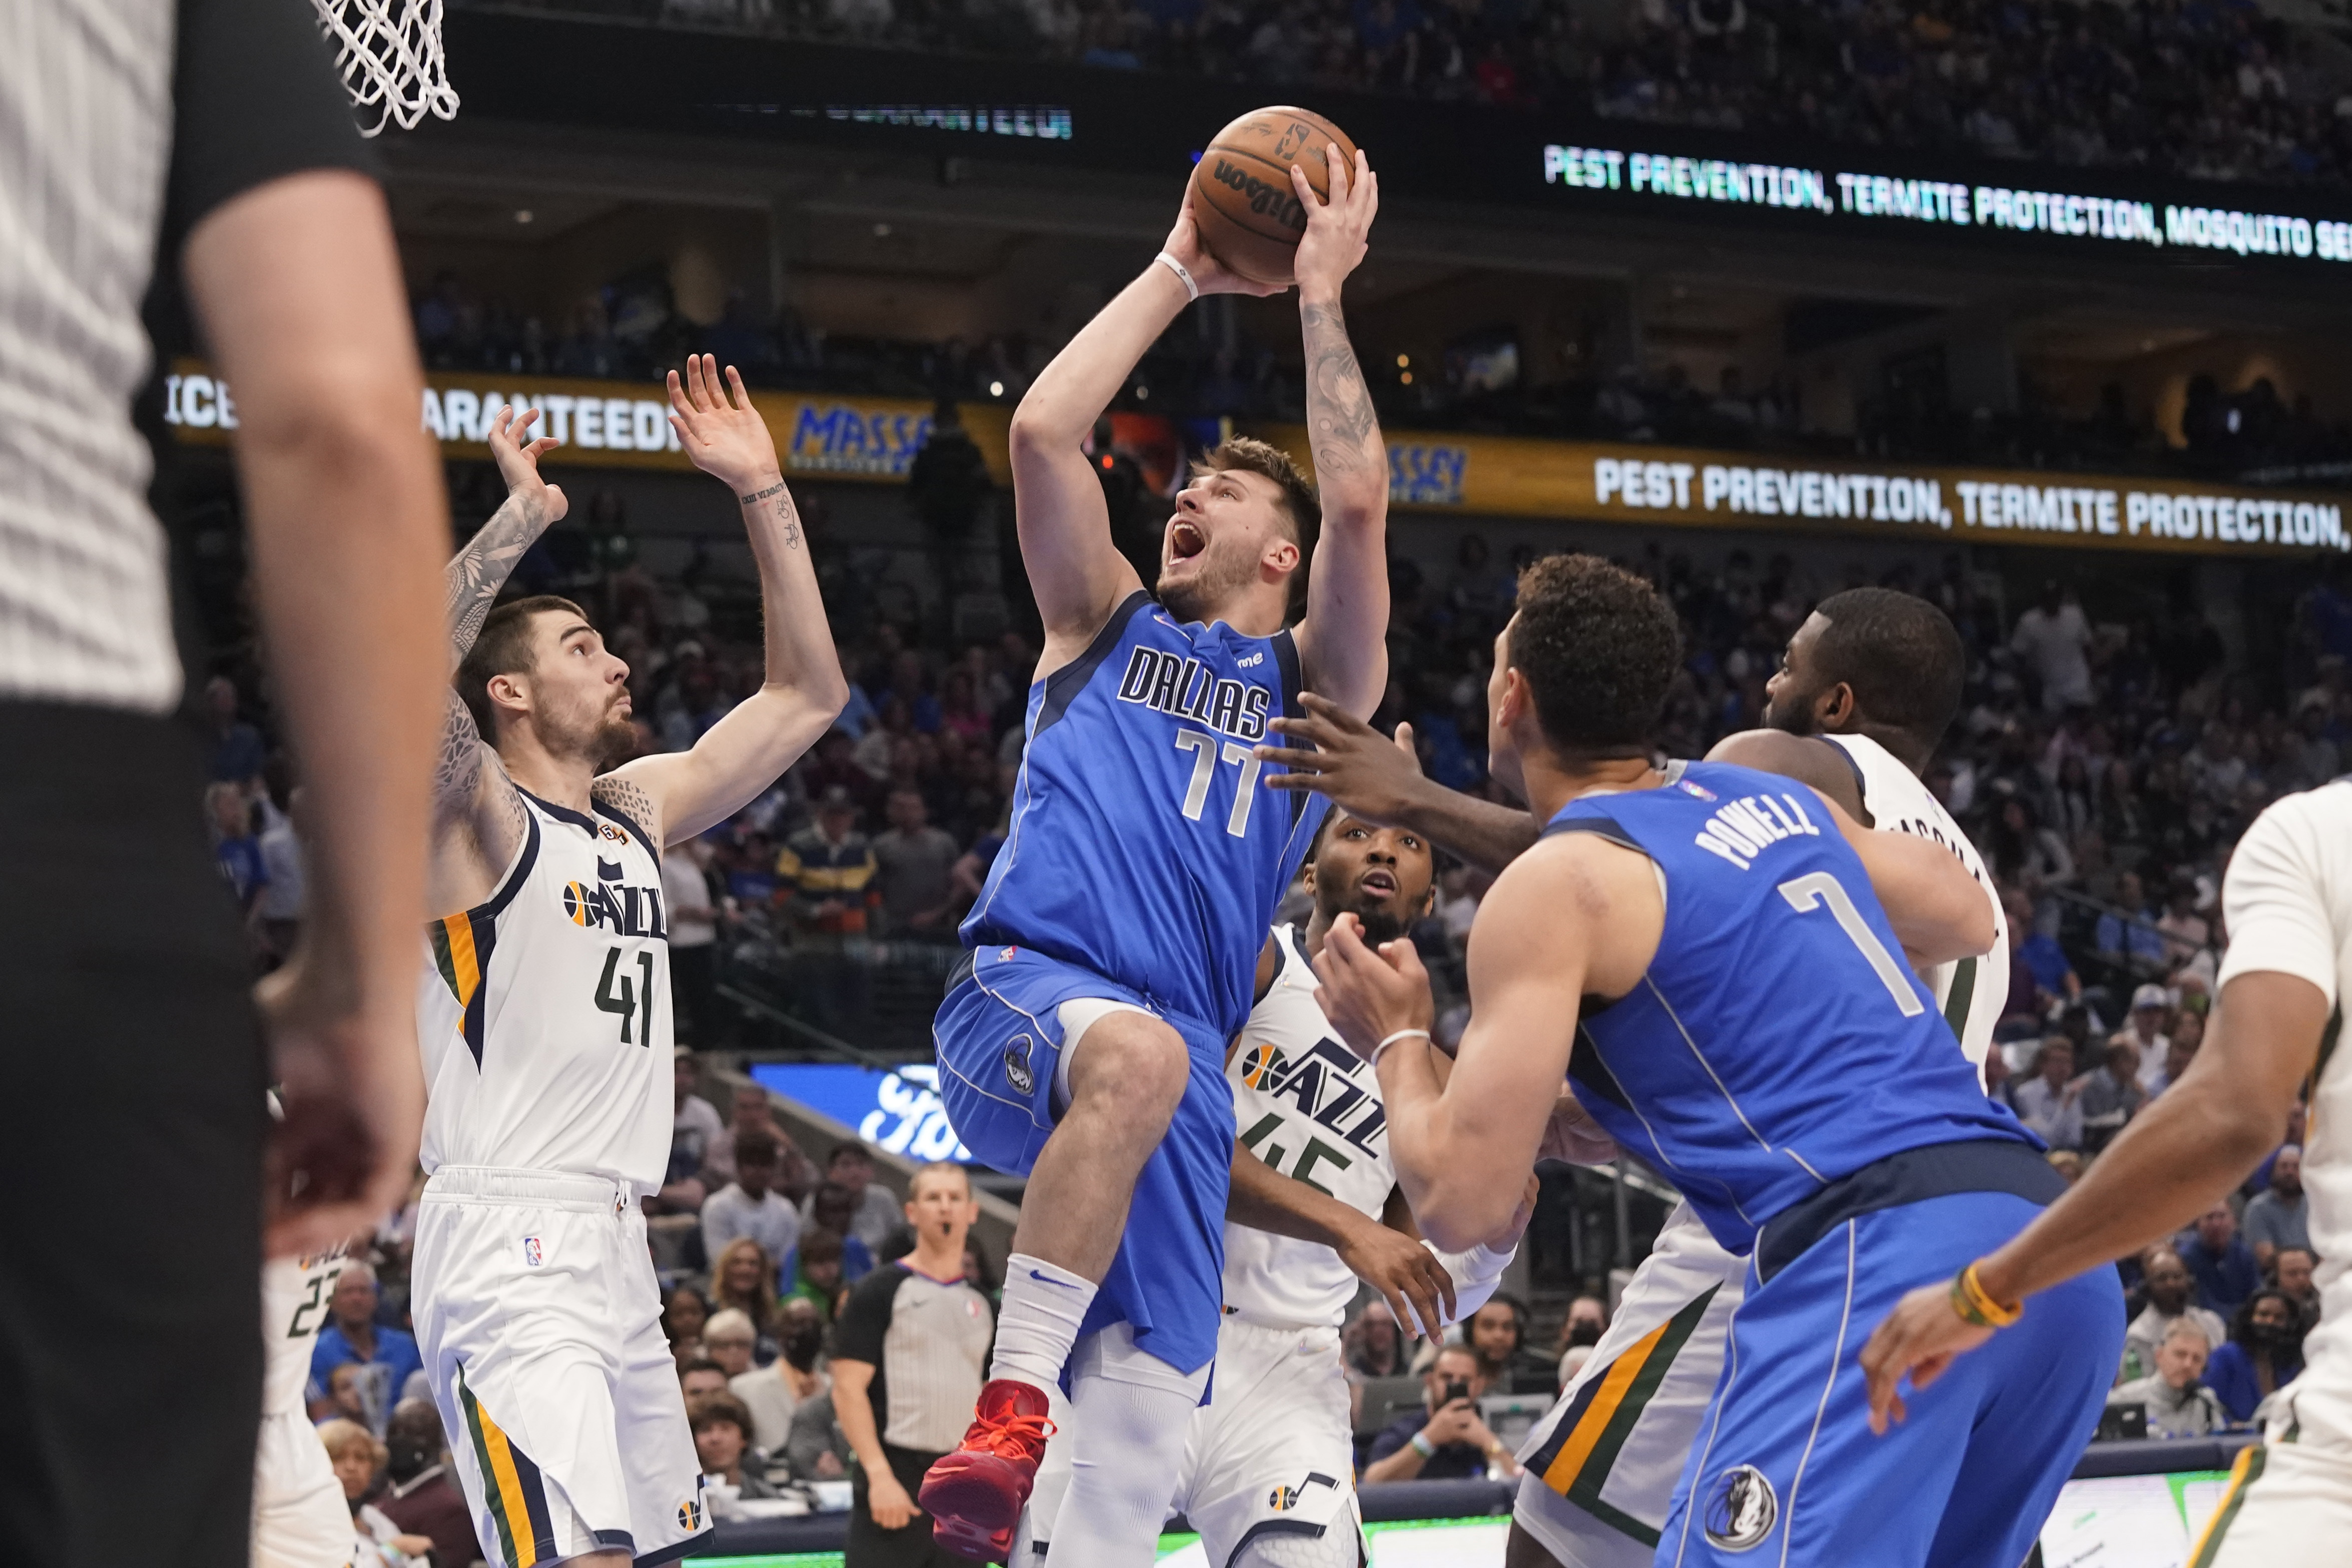 Utah Jazz at Dallas Mavericks live steam (4/21/22) How to watch NBA playoff series, time, channel